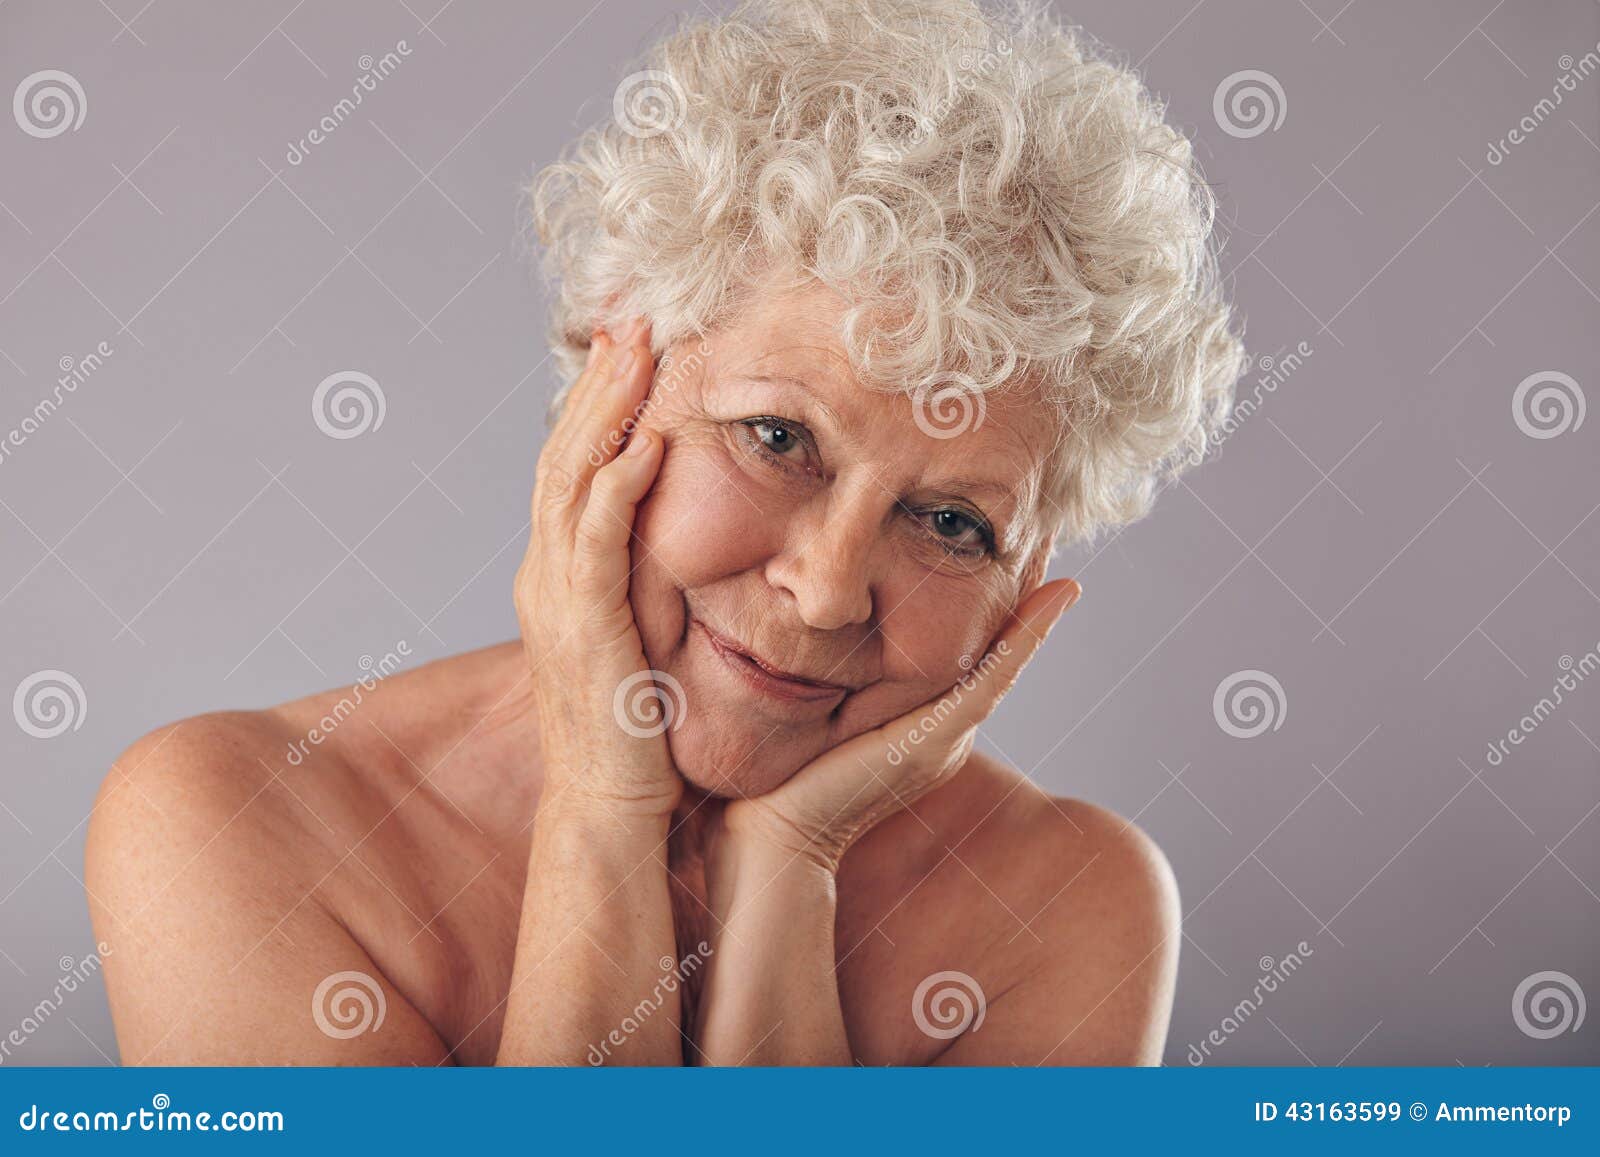 Old Woman With Beautiful Face Stock Image Image 43163599